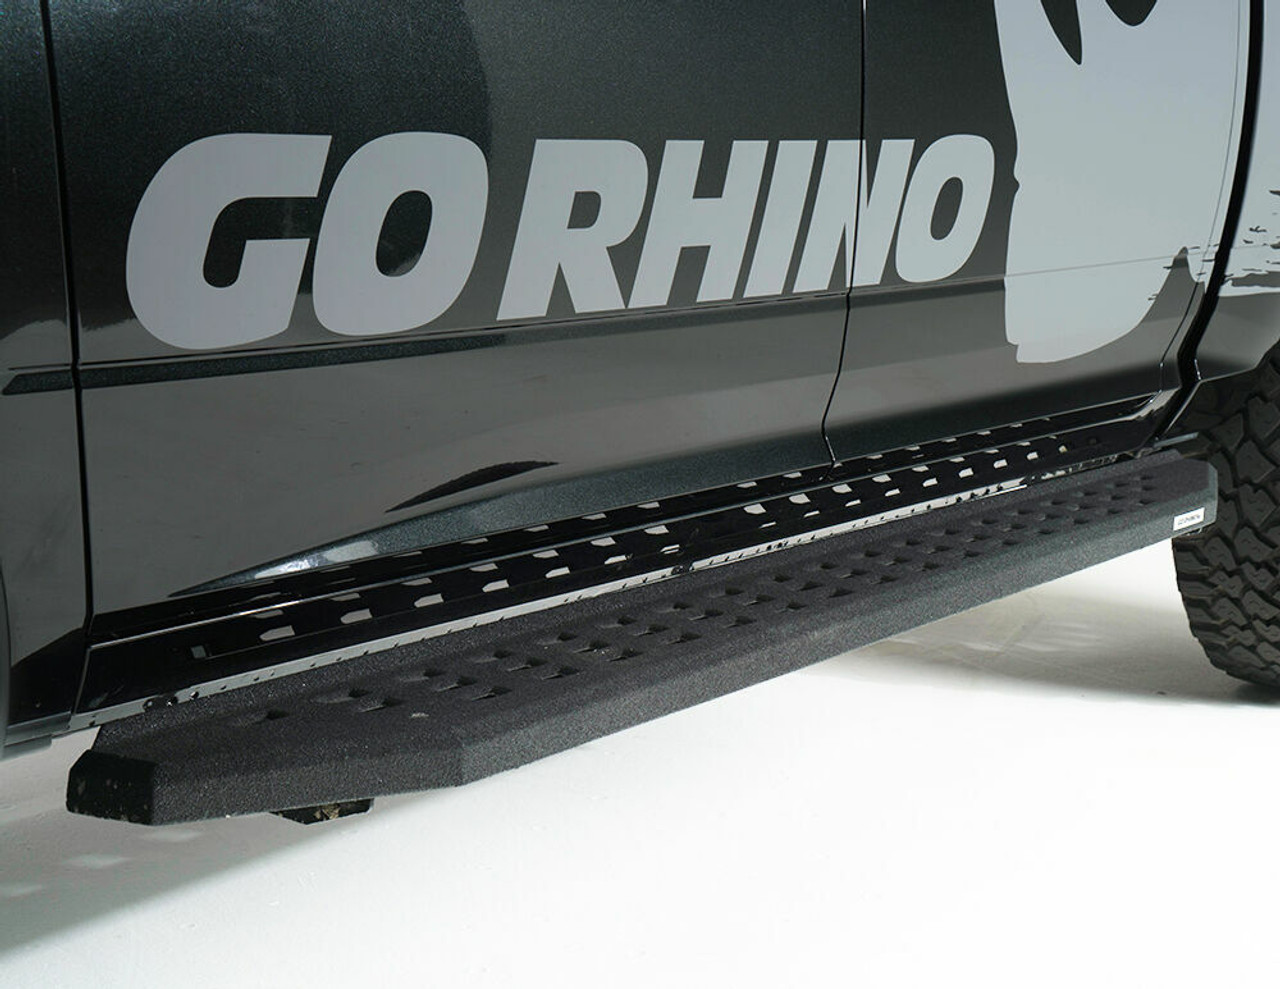 Go Rhino 6940518720PC Chevrolet, Silverado 2500HD, 3500HD, 2015 - 2019, RB20 Running boards - Complete Kit: 2 pair RB20 Drop Steps, Galvanized Steel, Textured black, 69400087PC RB20 + 6940515 RB Brackets + (2) 69420000PC Drop Step, Diesel only